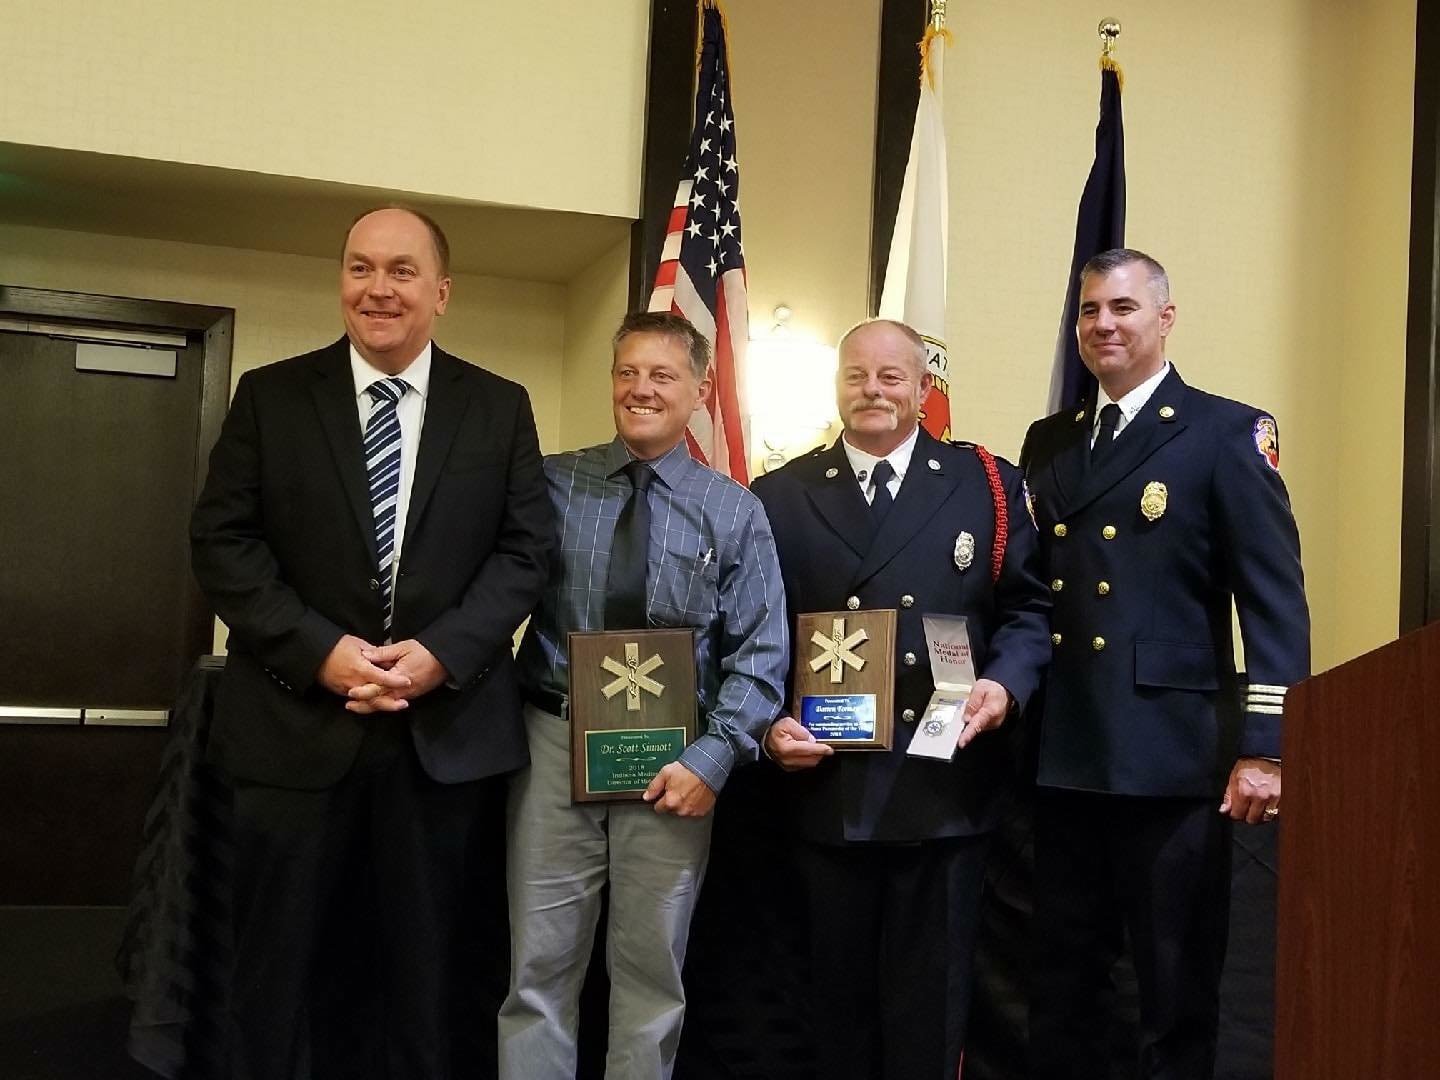 Pictured, from left, is Crawfordsville Mayor Todd Barton, Dr. Scott Sinnott with the Franciscan Physician Network, Darren Forman and Crawfordsville Fire Department Division Chief of EMS Paul Miller. The photo was taken when Forman was named 2019 Paramedic Hero of the Year by the Indiana Department of Homeland Security and Indiana Fire Chief’s Association.